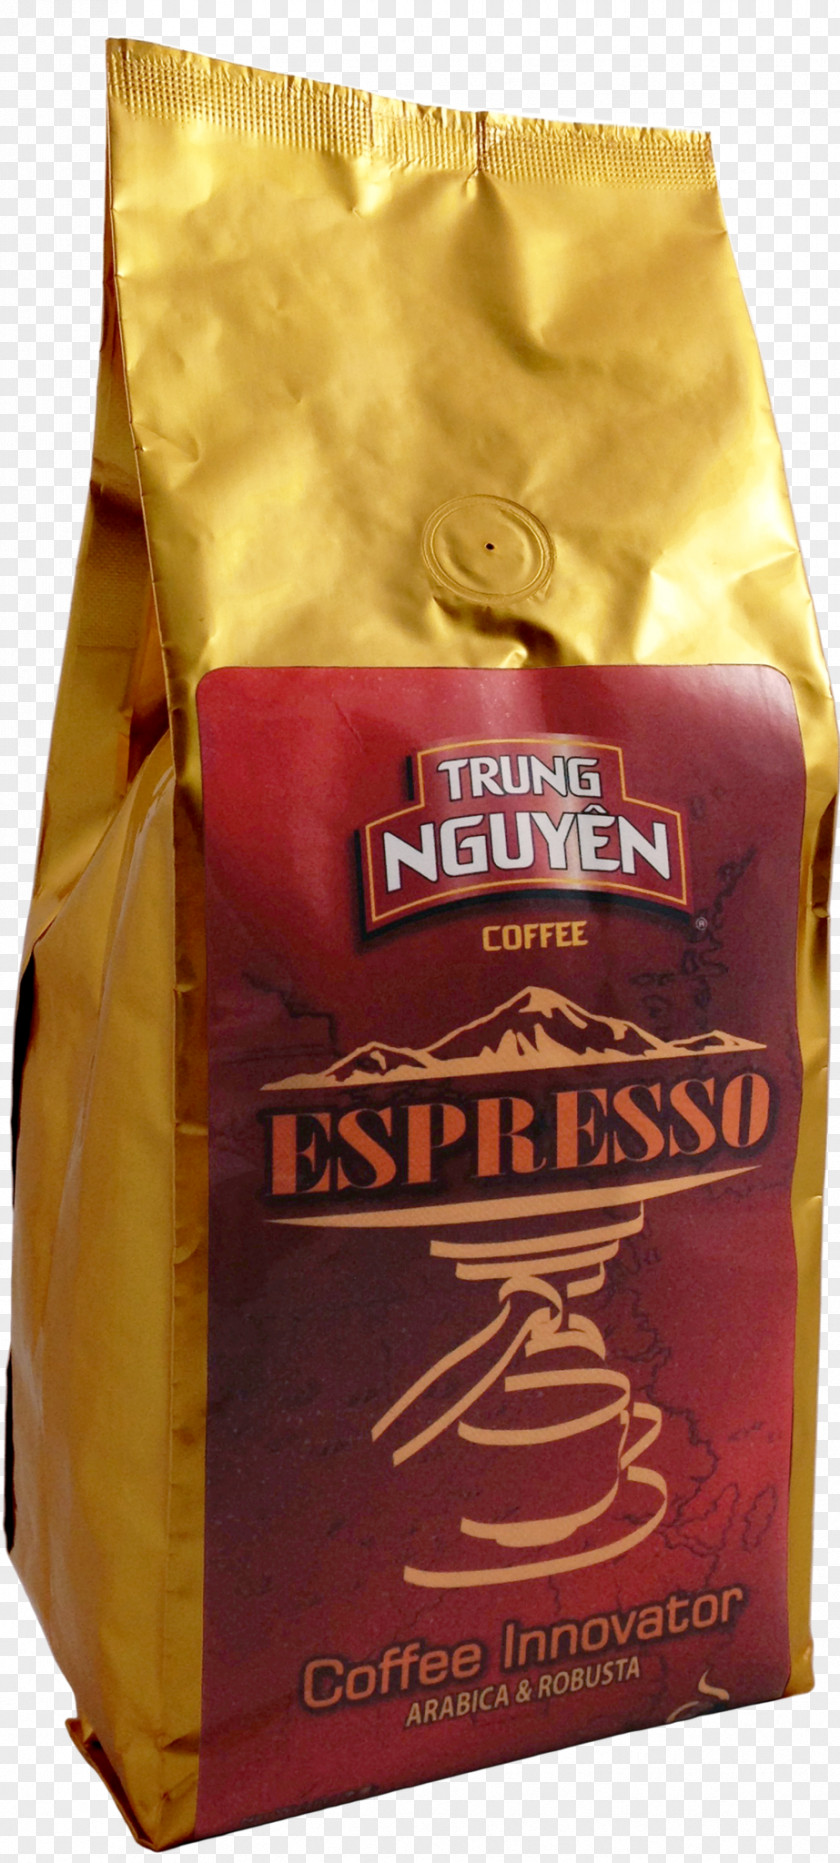 Coffee Espresso Trung Nguyên Flavor PNG